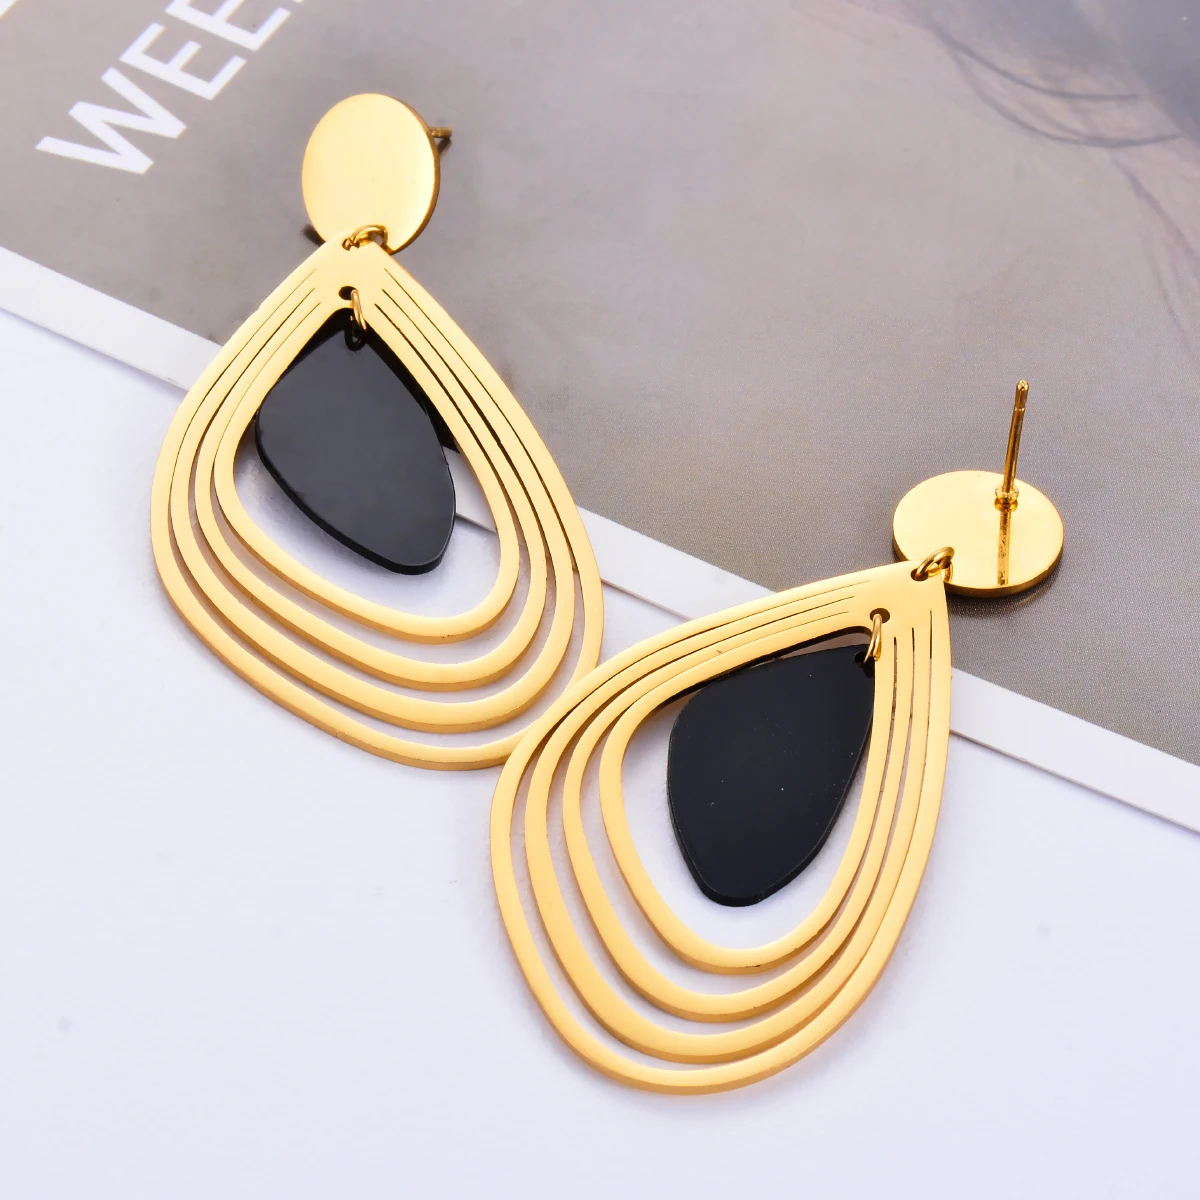 

1Pair Classic Big Hoop Earring Round Loop Circle Gothic Punk Hoop Large Size Lightweight Earrings for Women Fashion Jewelry